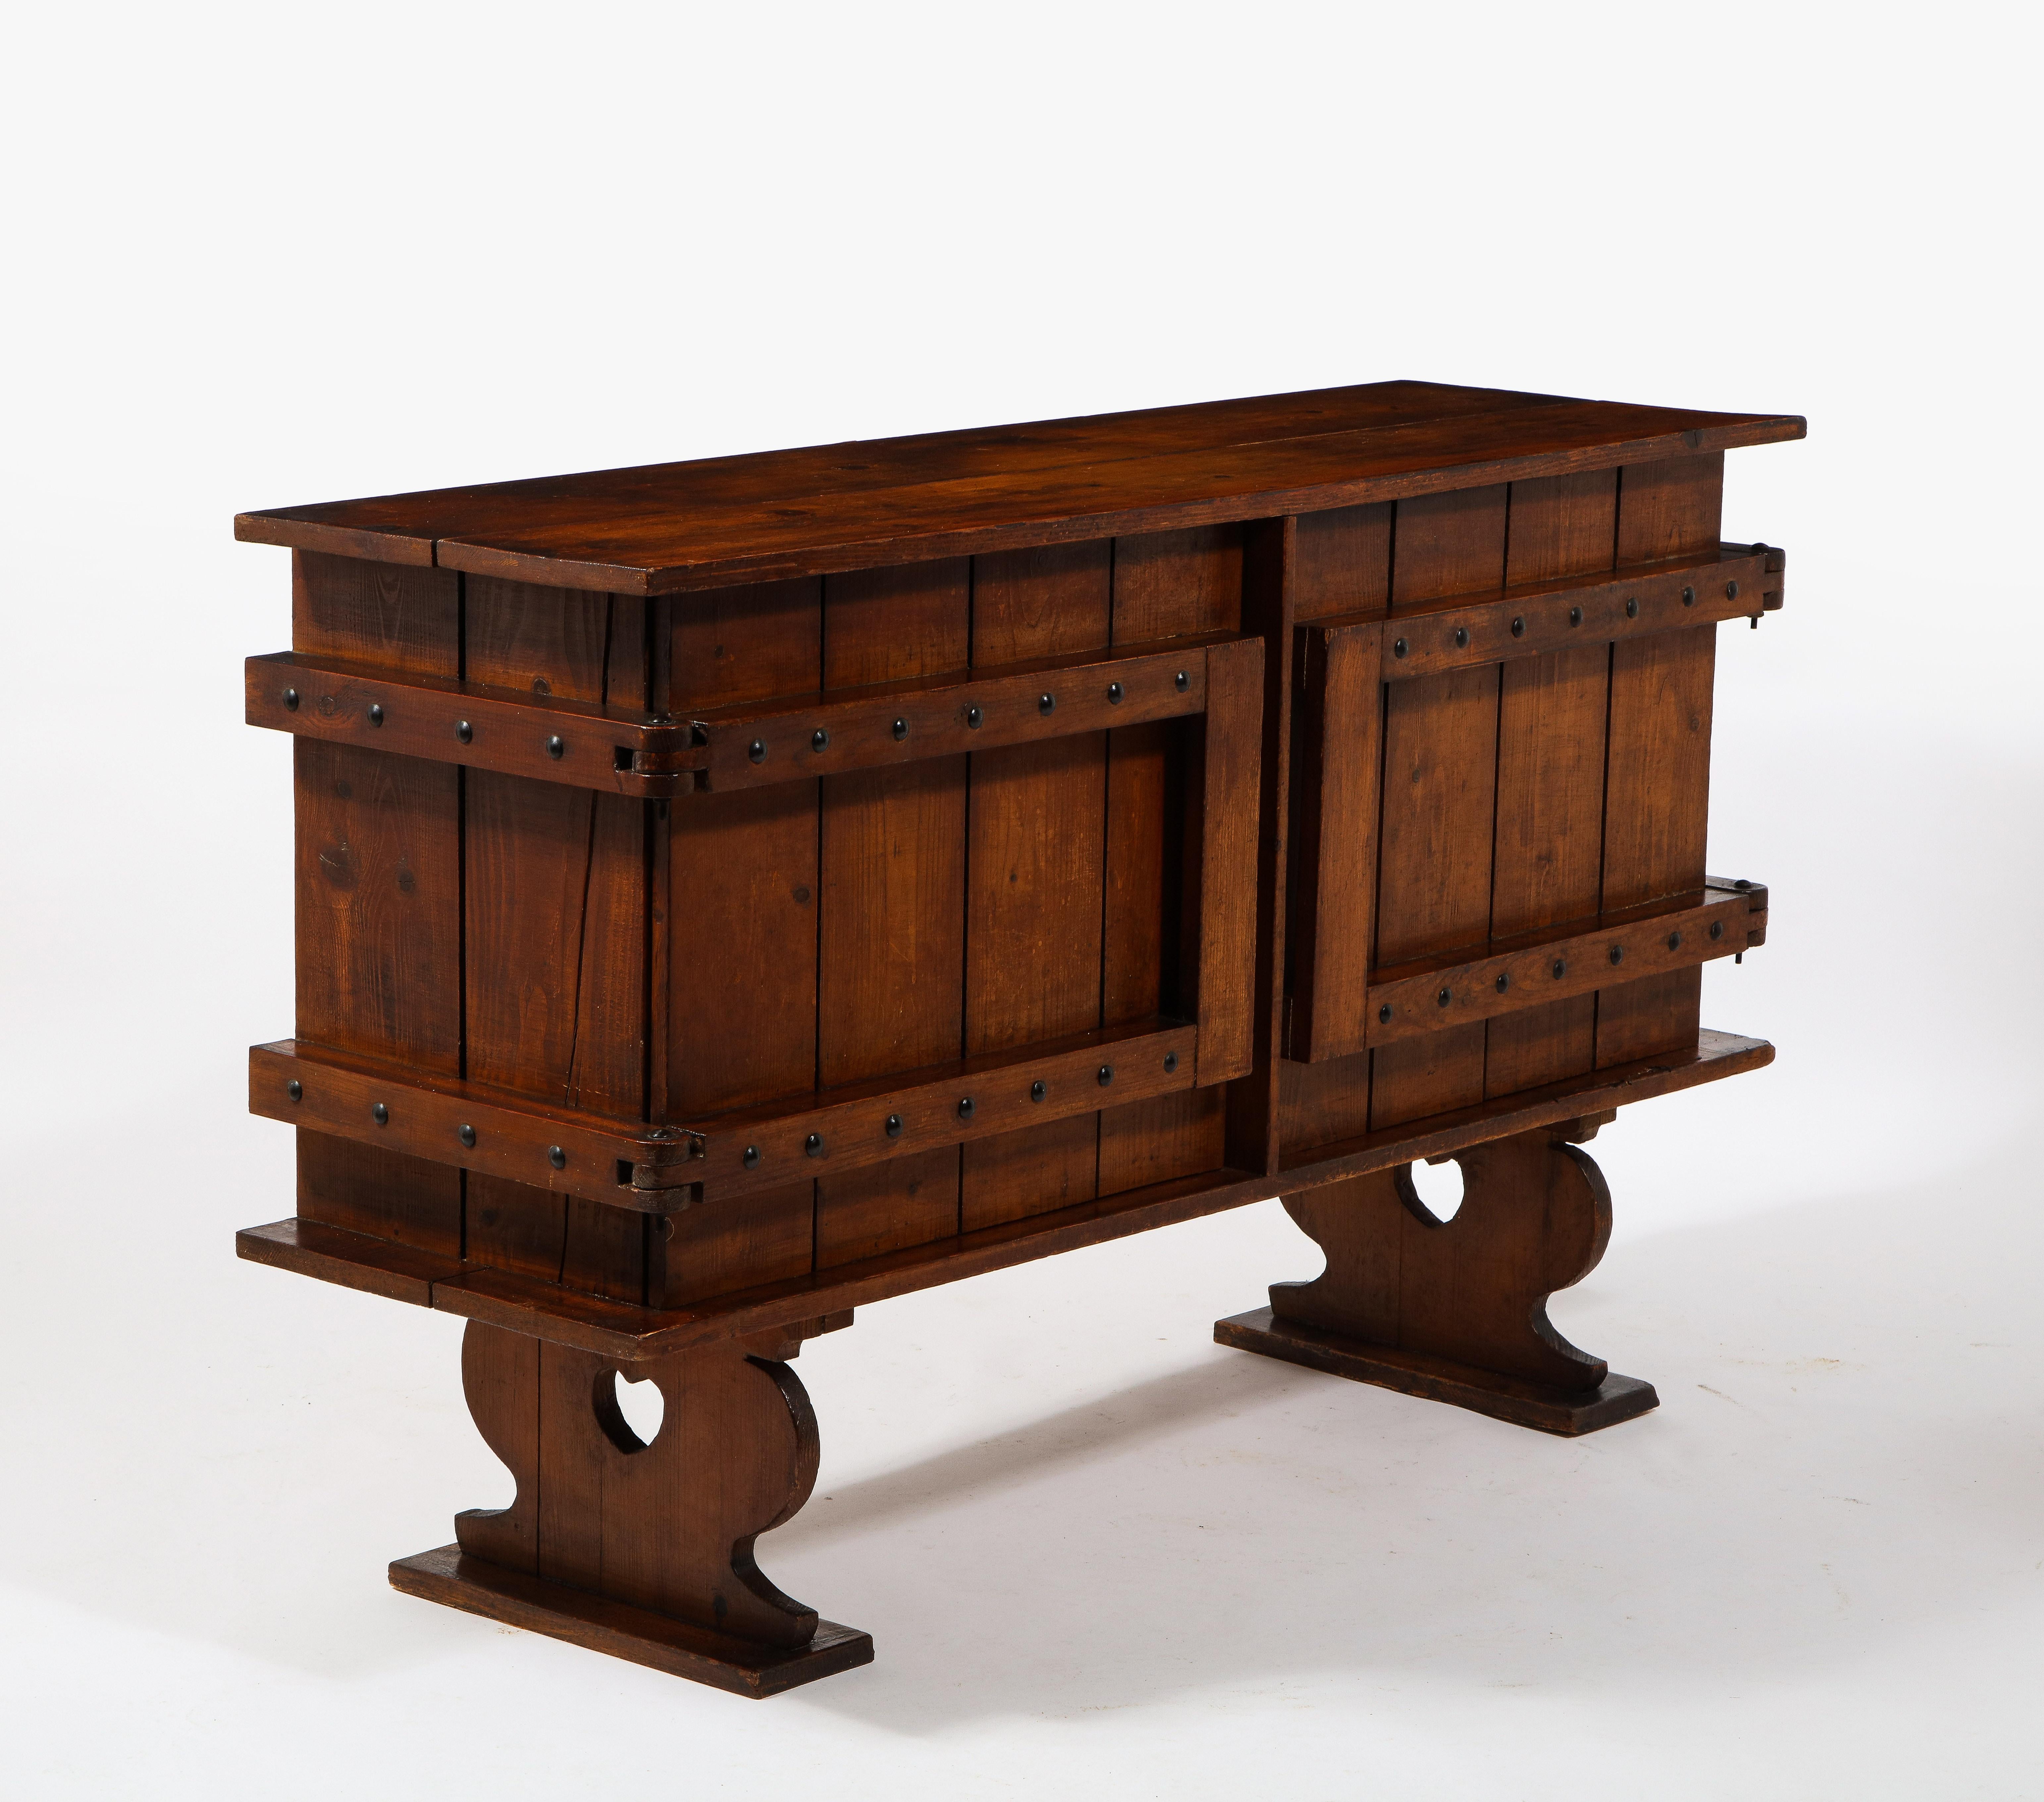 Brutalist Neo-Gothic Rustic Two-Door Pine Sideboard Credenza, France 1920's For Sale 7